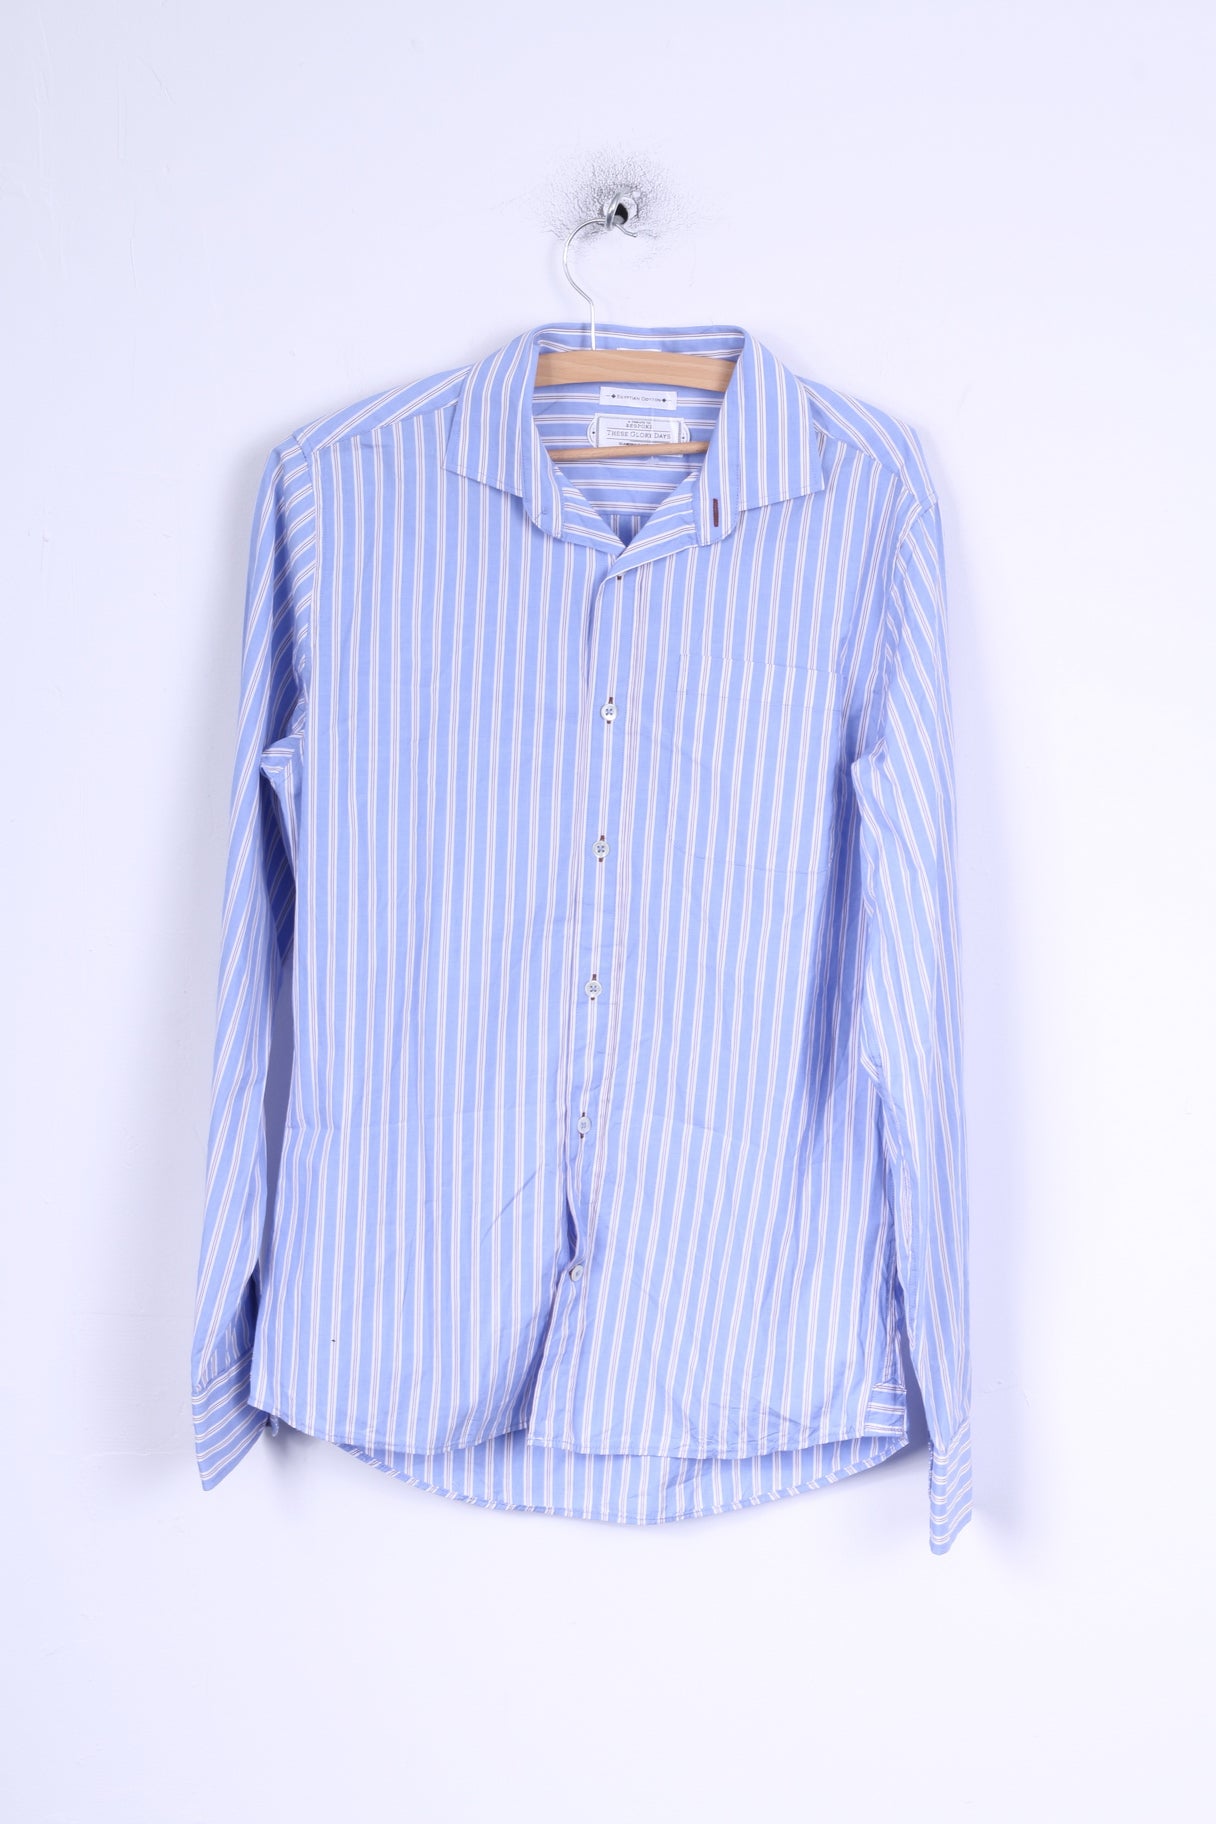 These Glory Days Mens M Casual Shirt Blue Striped Slim Fit Egyptian Cotton